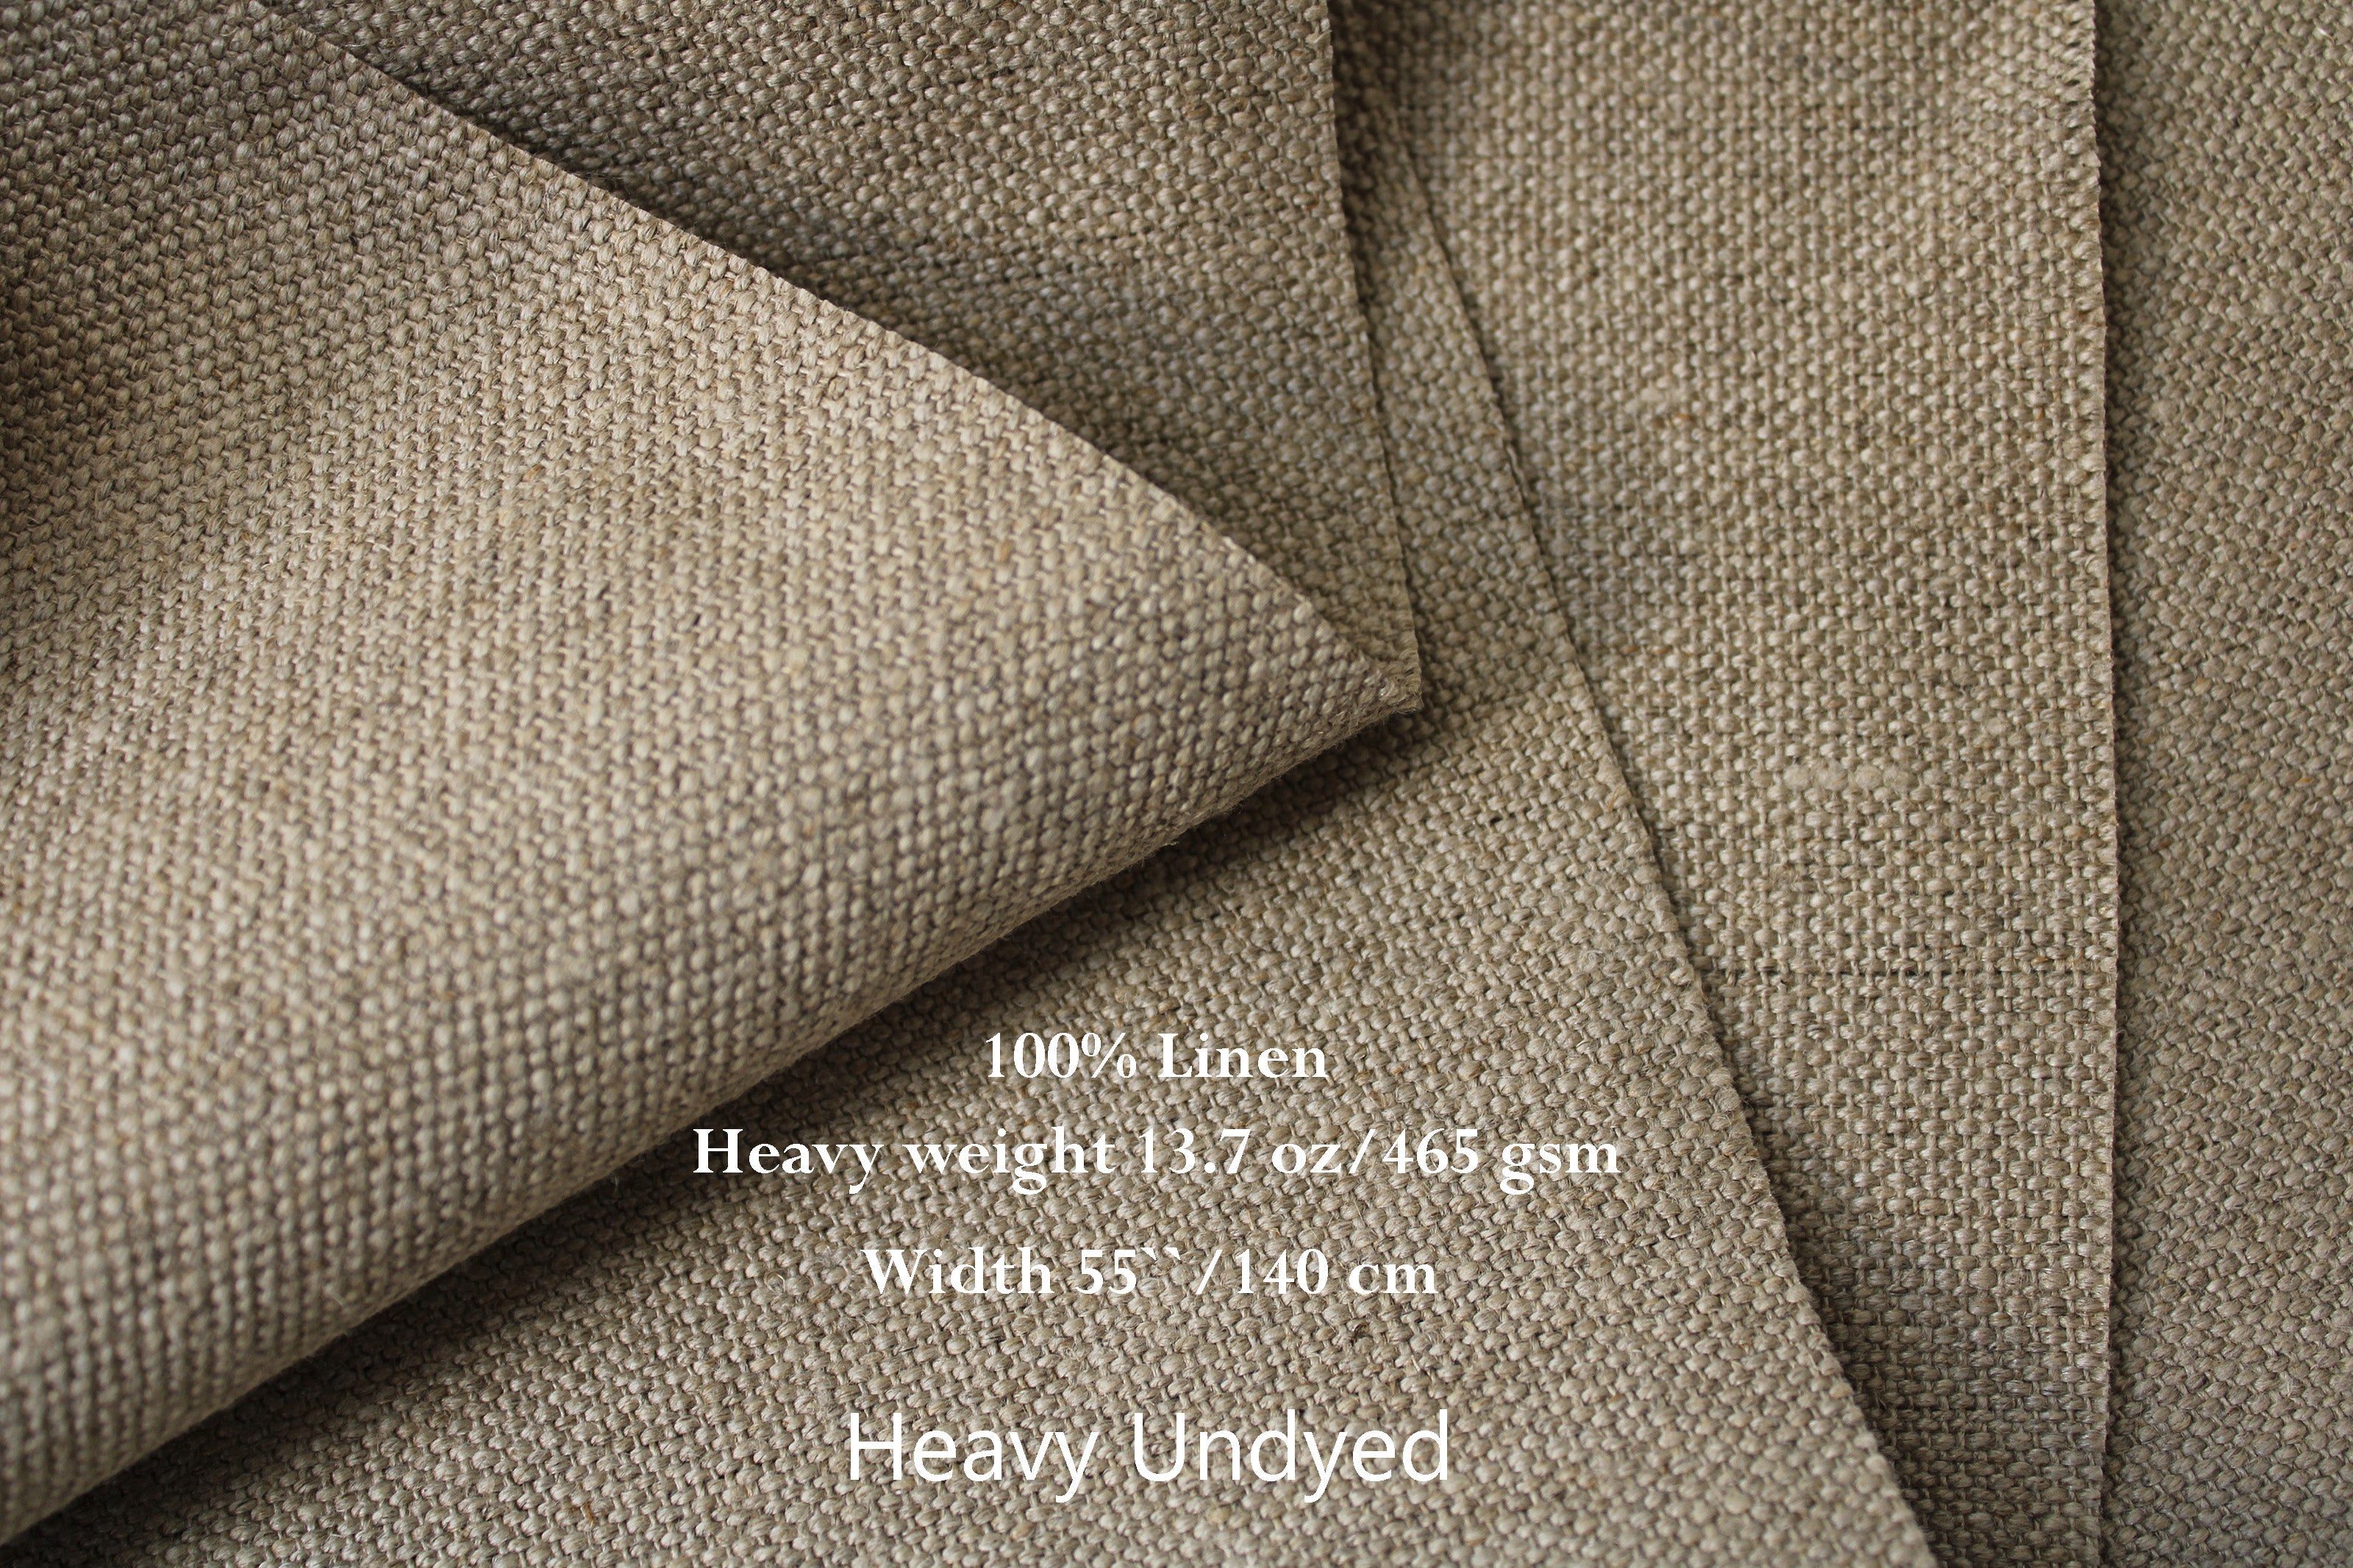 WHOLESALE Upholstery Linen Fabric / Heavyweight Linen Fabric by the yard